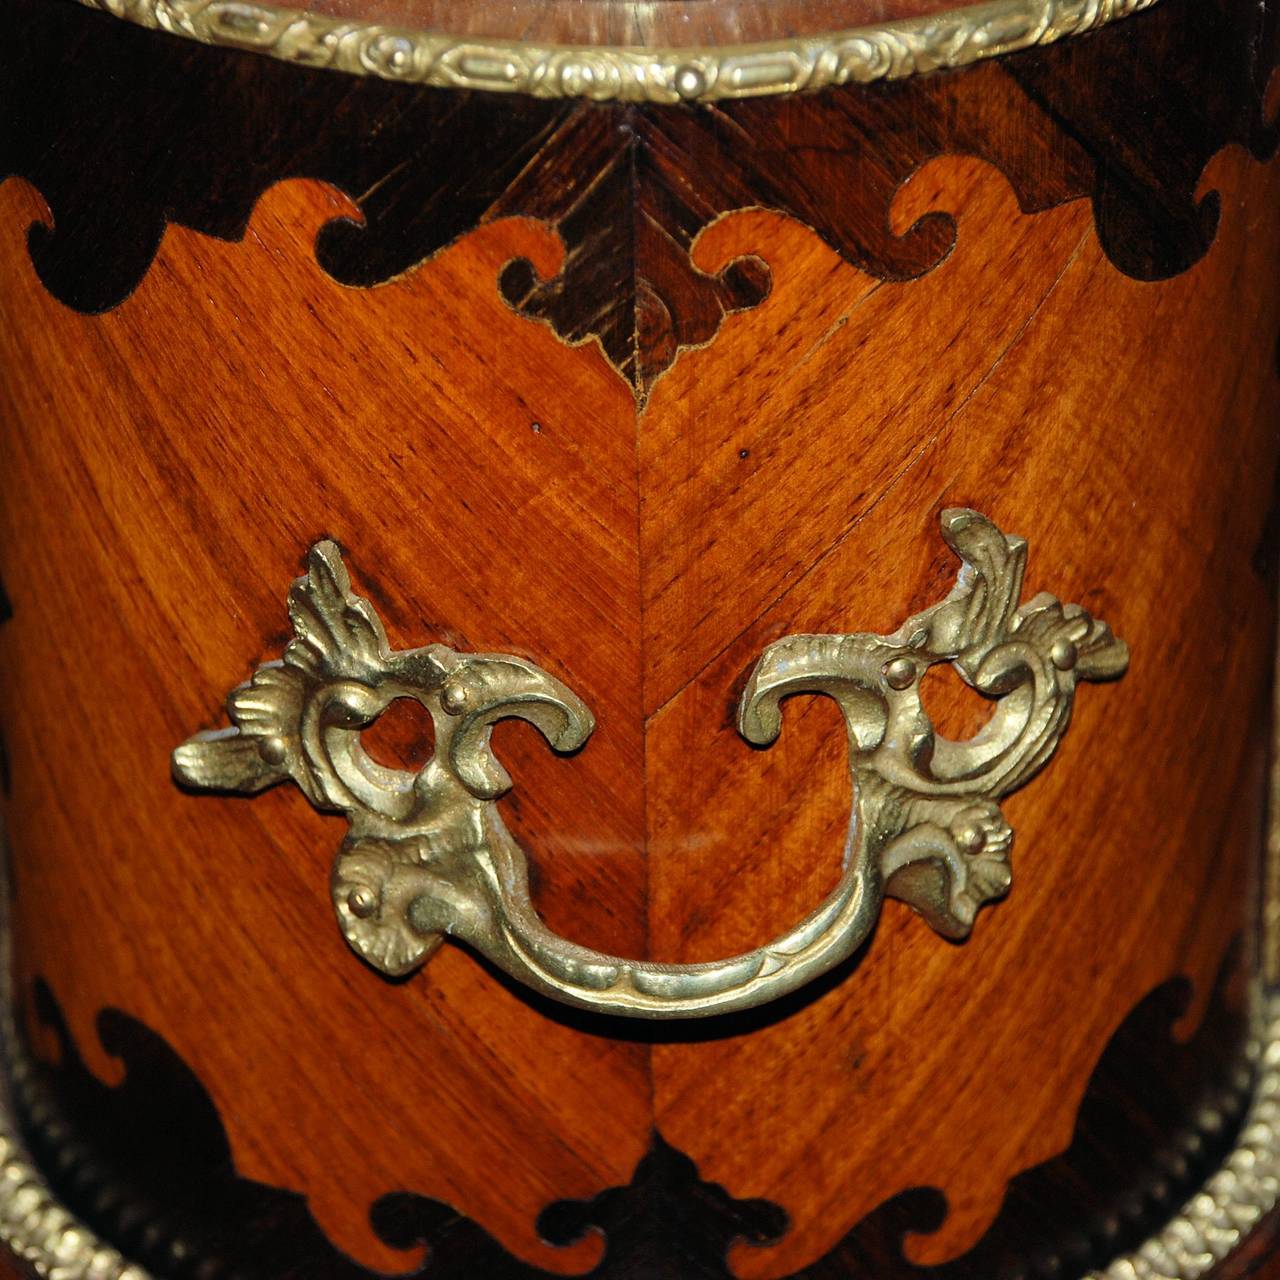 Antique Jardiniere Made of Inlaid Exotic Wood 1